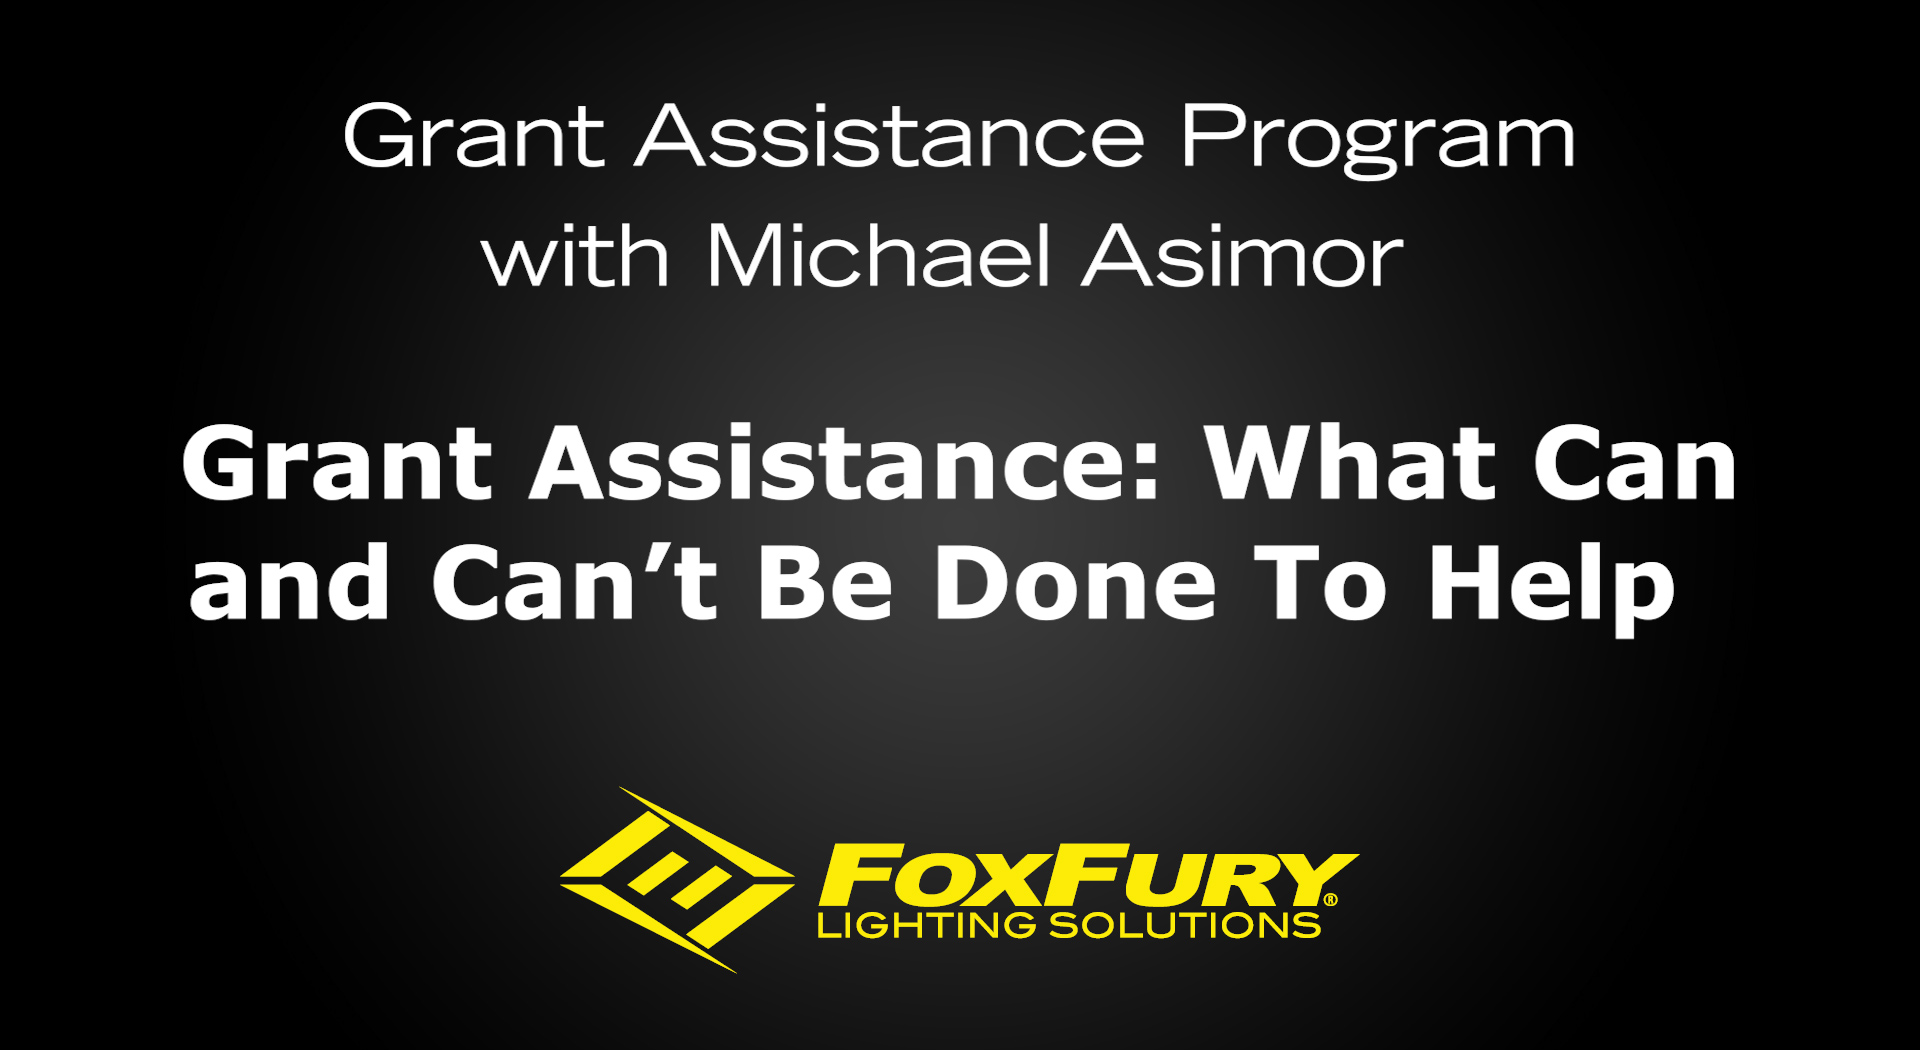 Grant Assistance: What Can and Can't Be Done to Help video